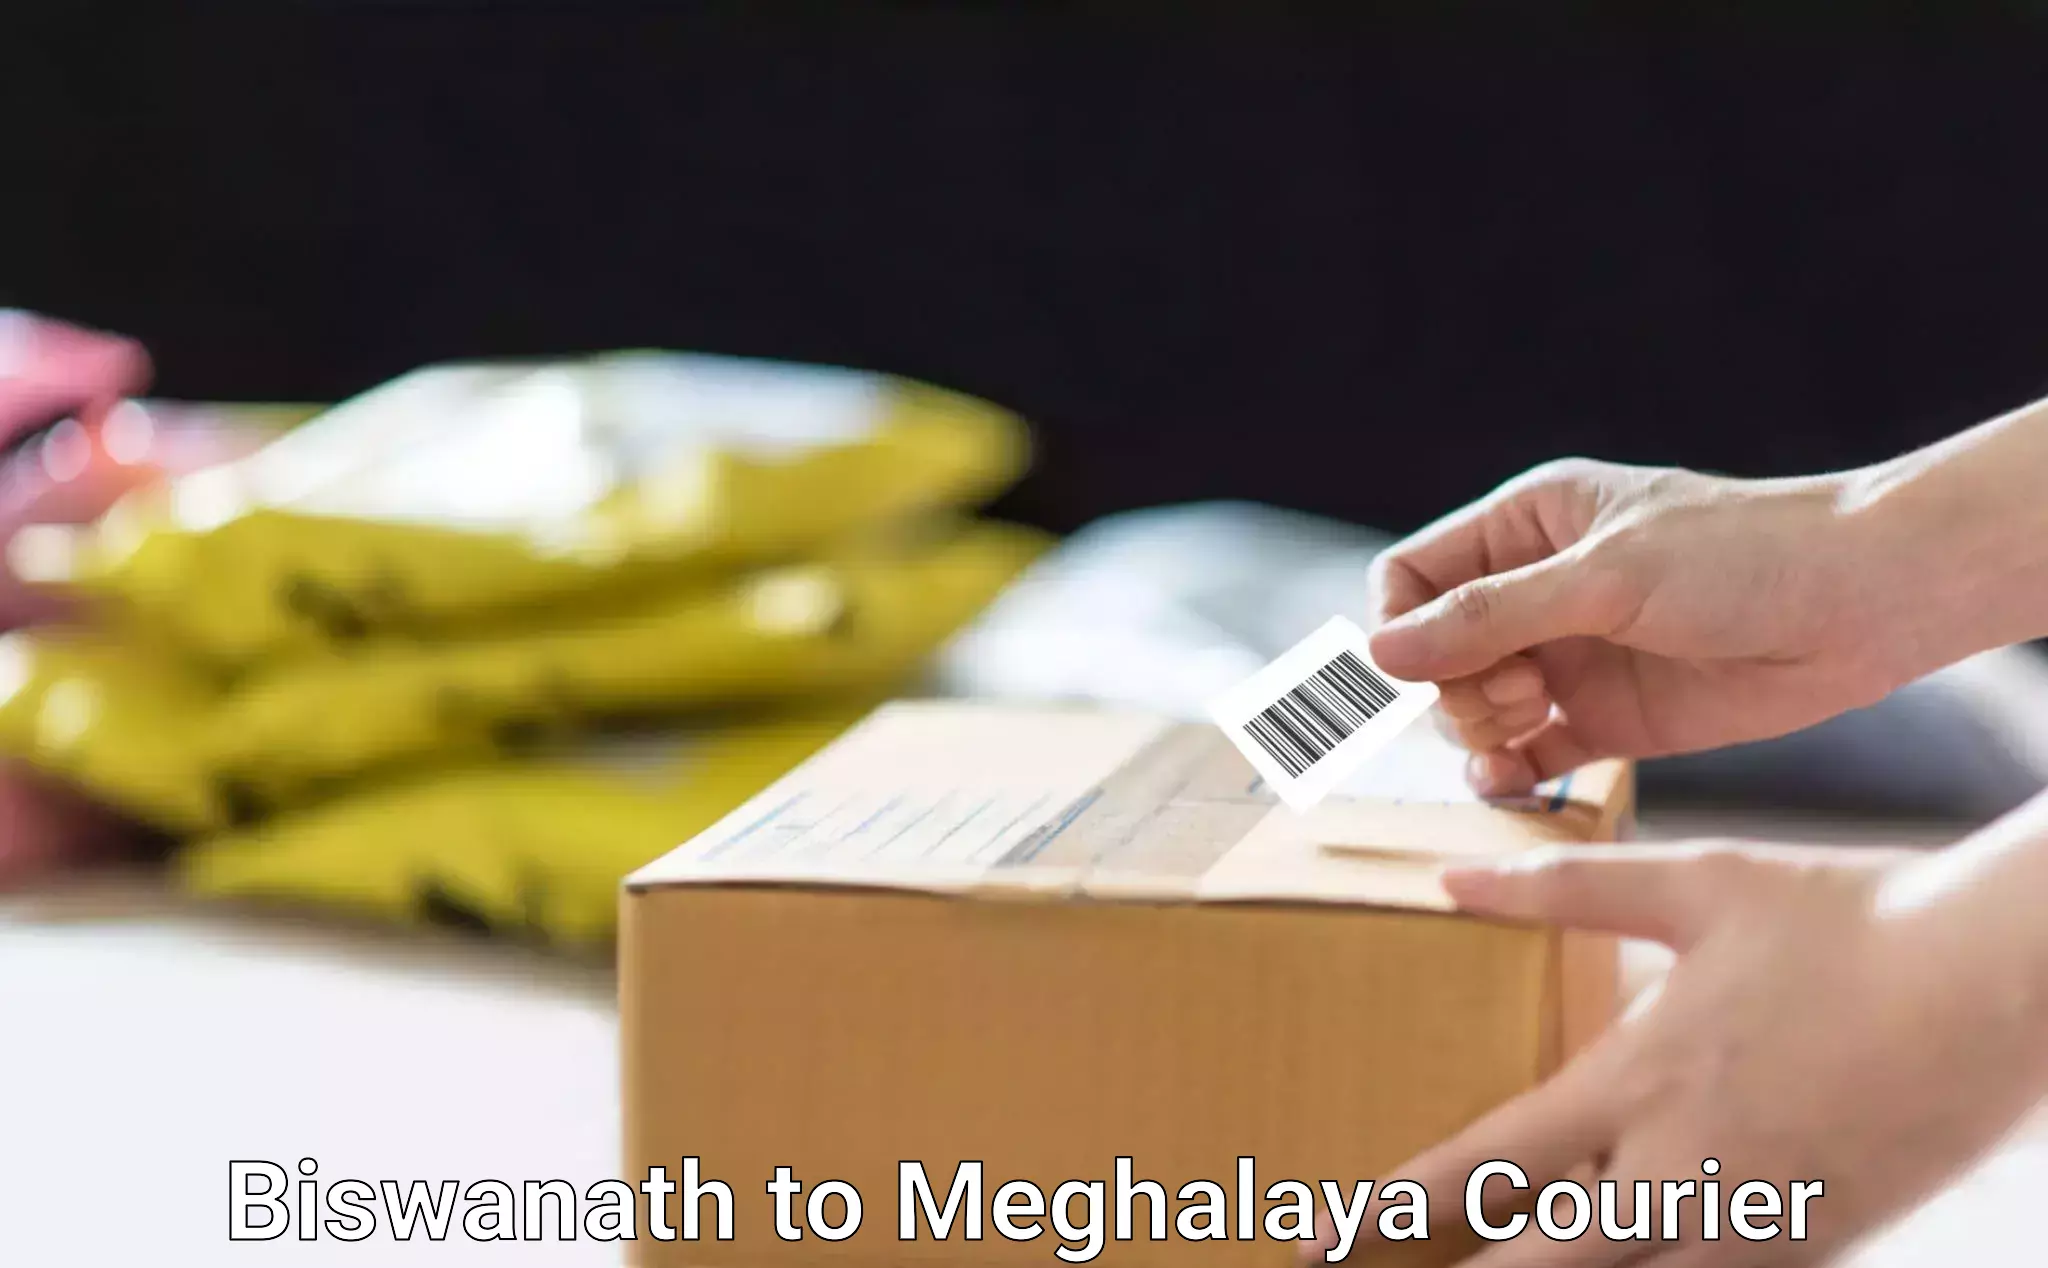 24/7 courier service Biswanath to Meghalaya